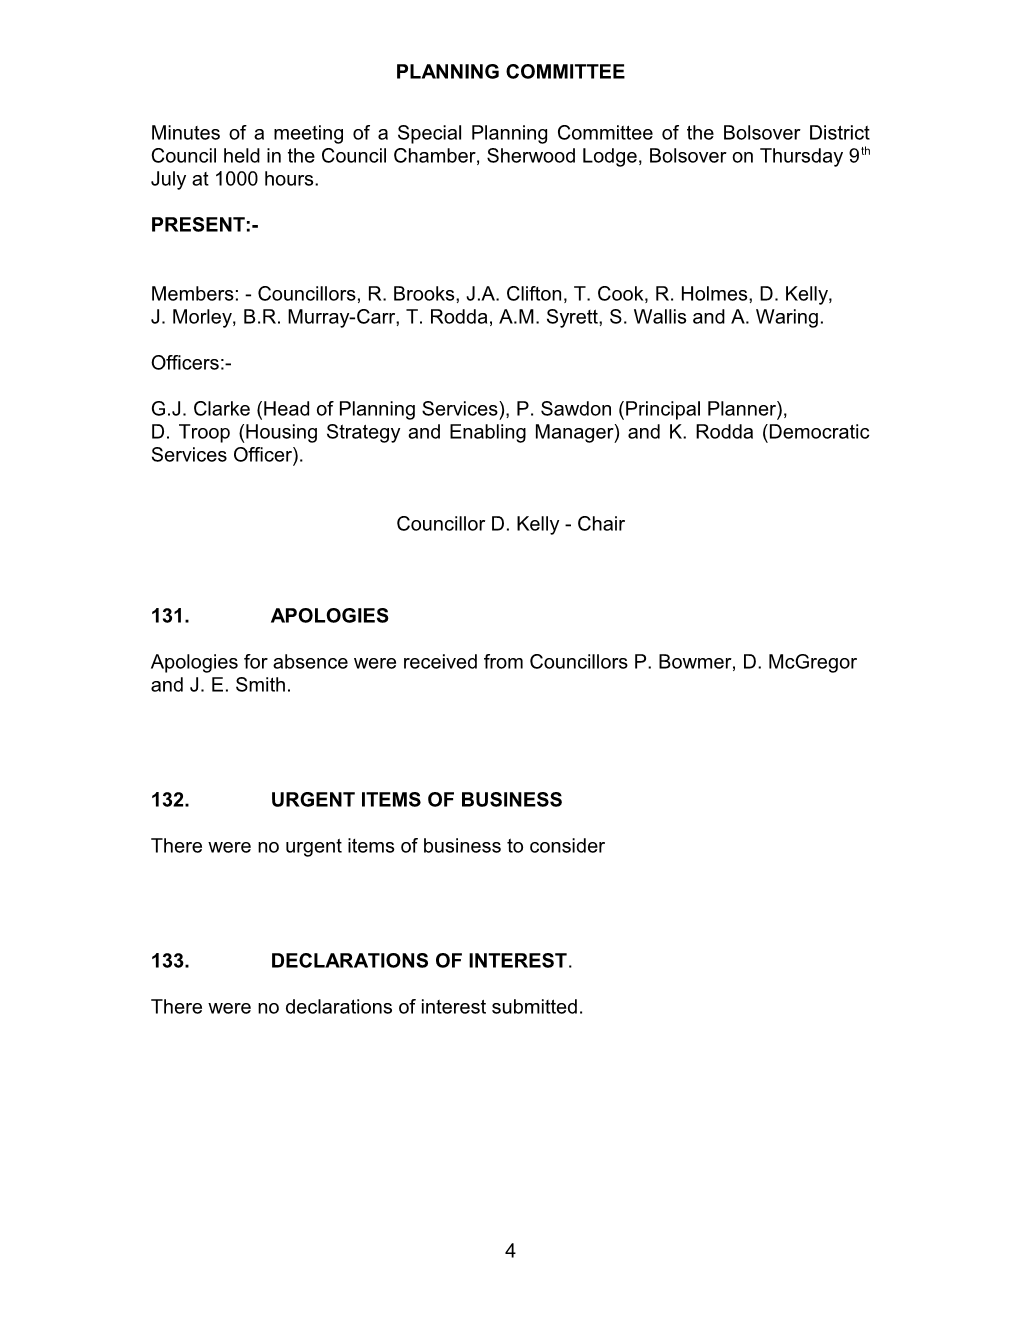 Minutes of a Meeting of a Special Planning Committee of the Bolsover District Council Held